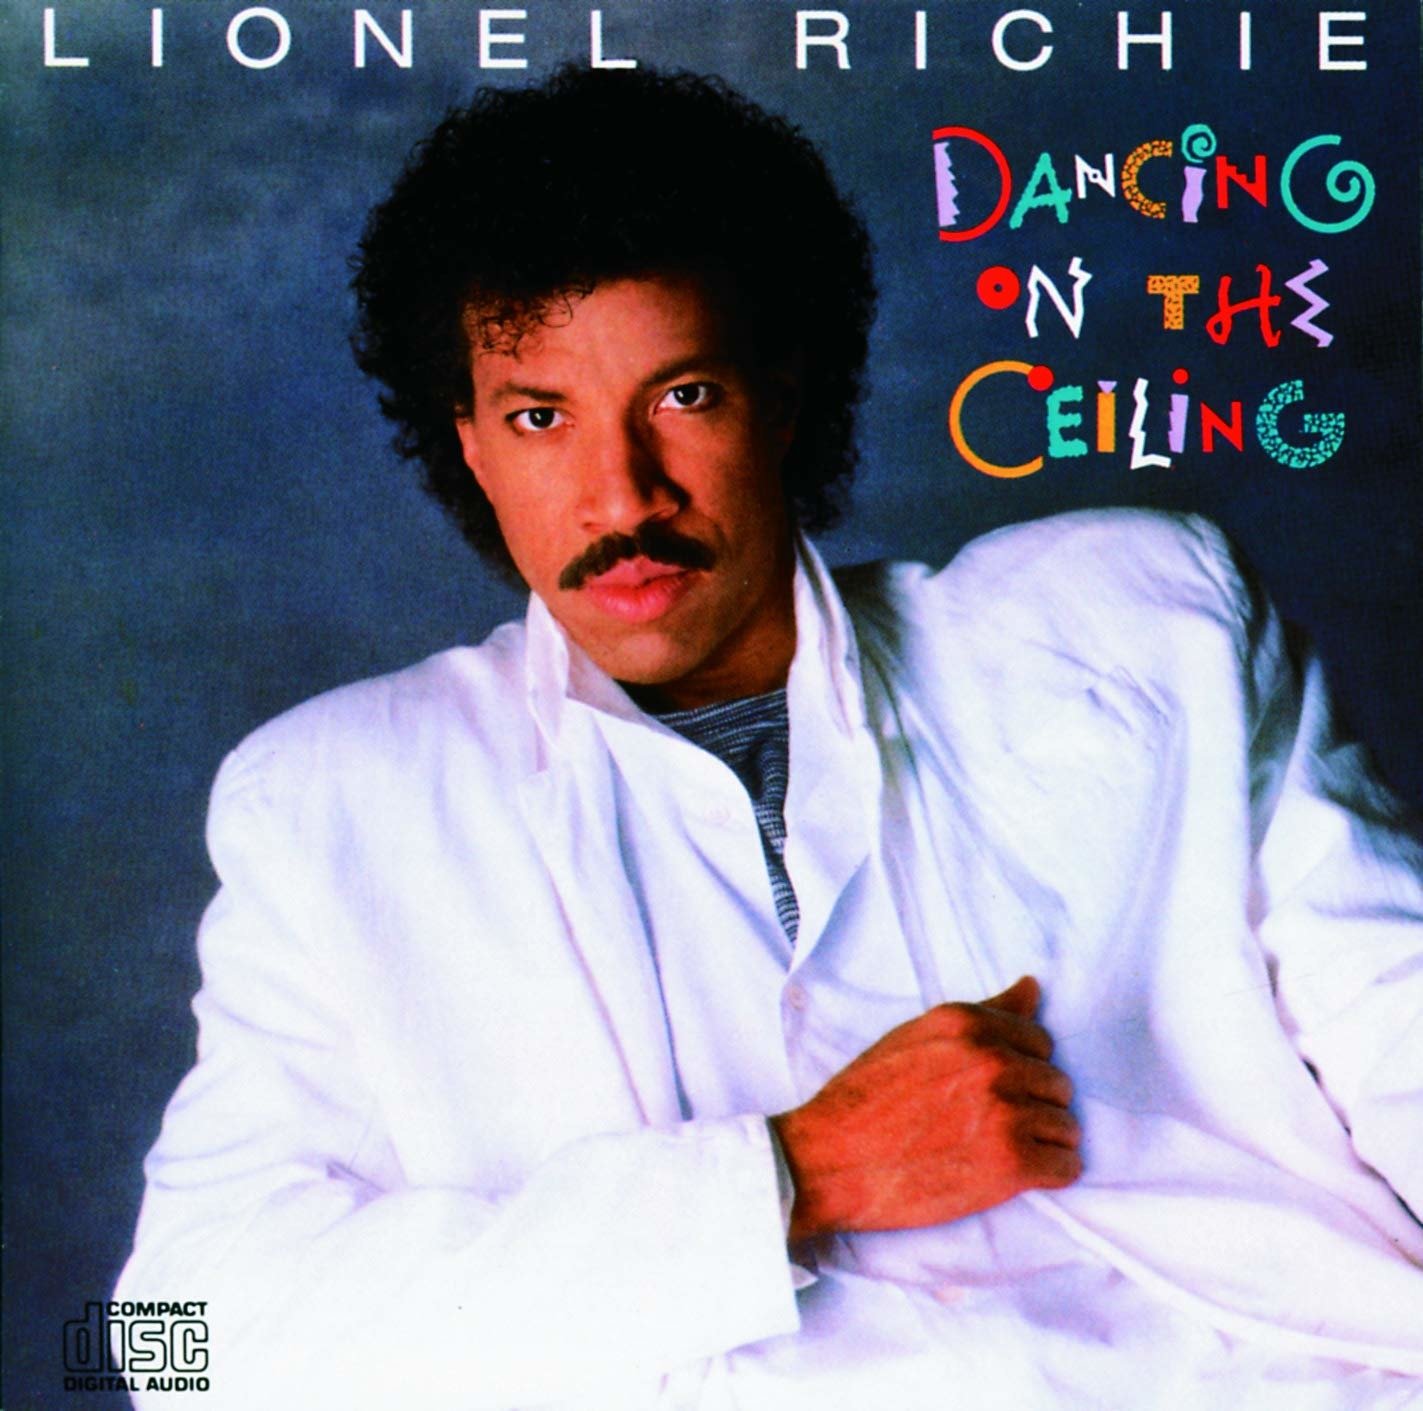 CD Shop - RICHIE, LIONEL DANCING ON THE CEILING